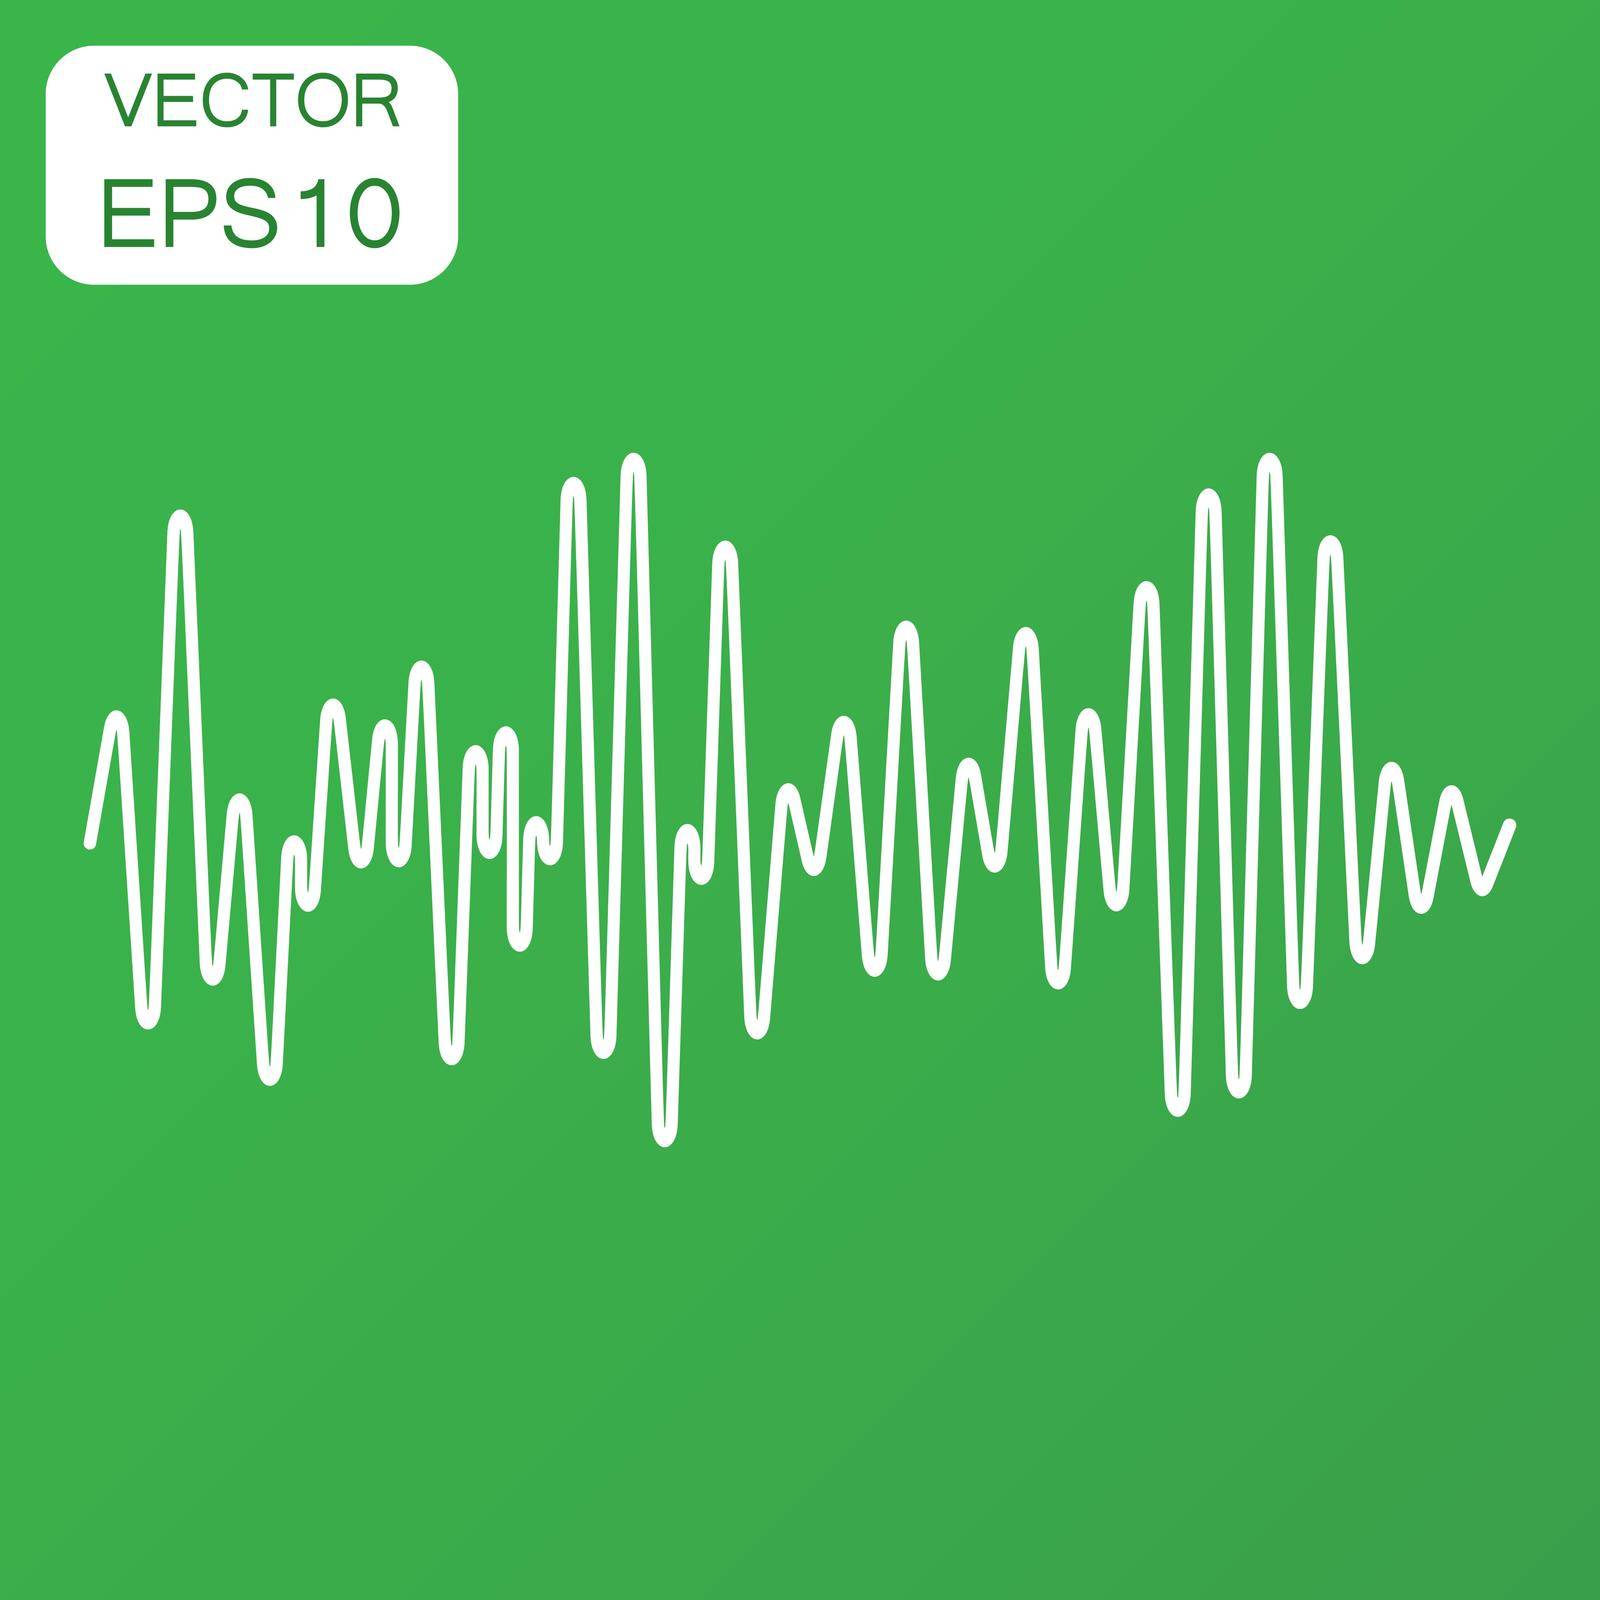 Vector sound waveform icon. Business concept Sound waves and musical pulse pictogram. Vector illustration on green background with long shadow.